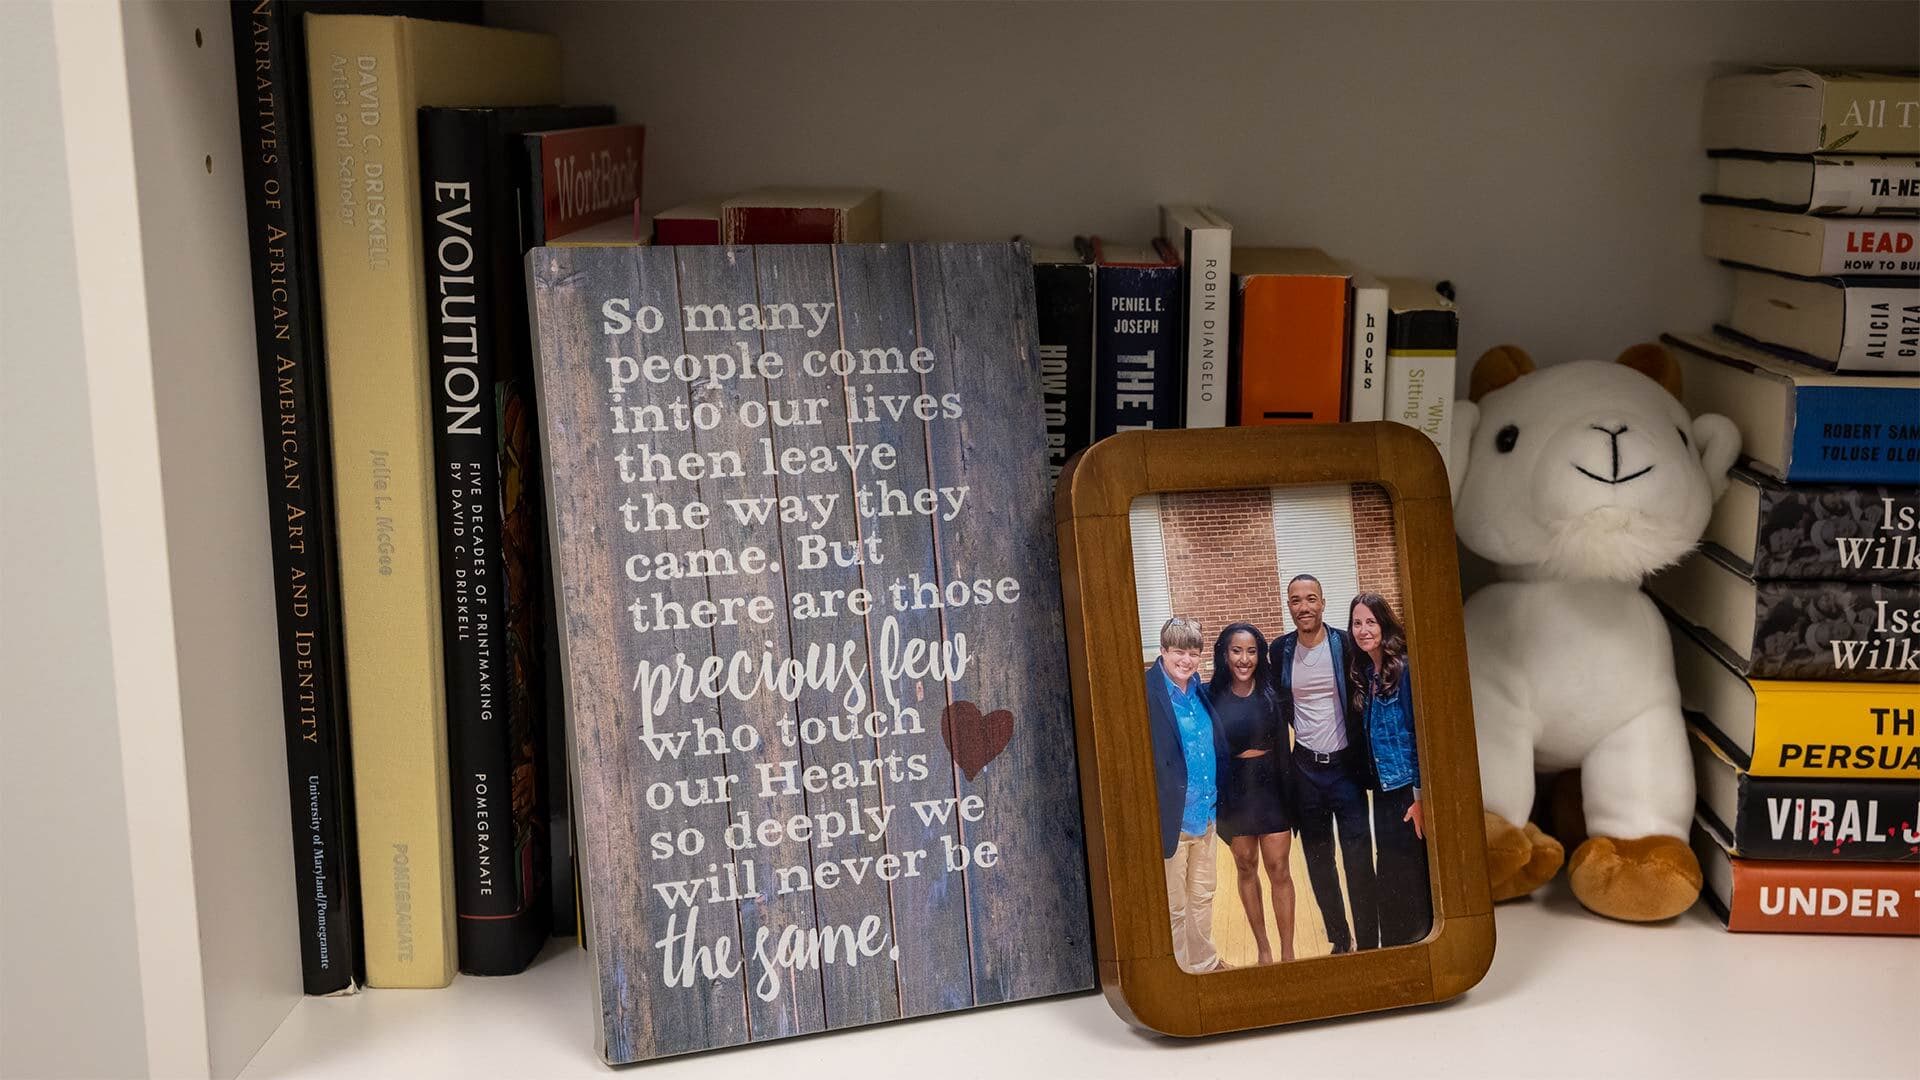 decoration with quote that reads, "So many people come into our lives then leave the way they came. But there are those precious few who touch our Hearts so deeply we will never be the same."